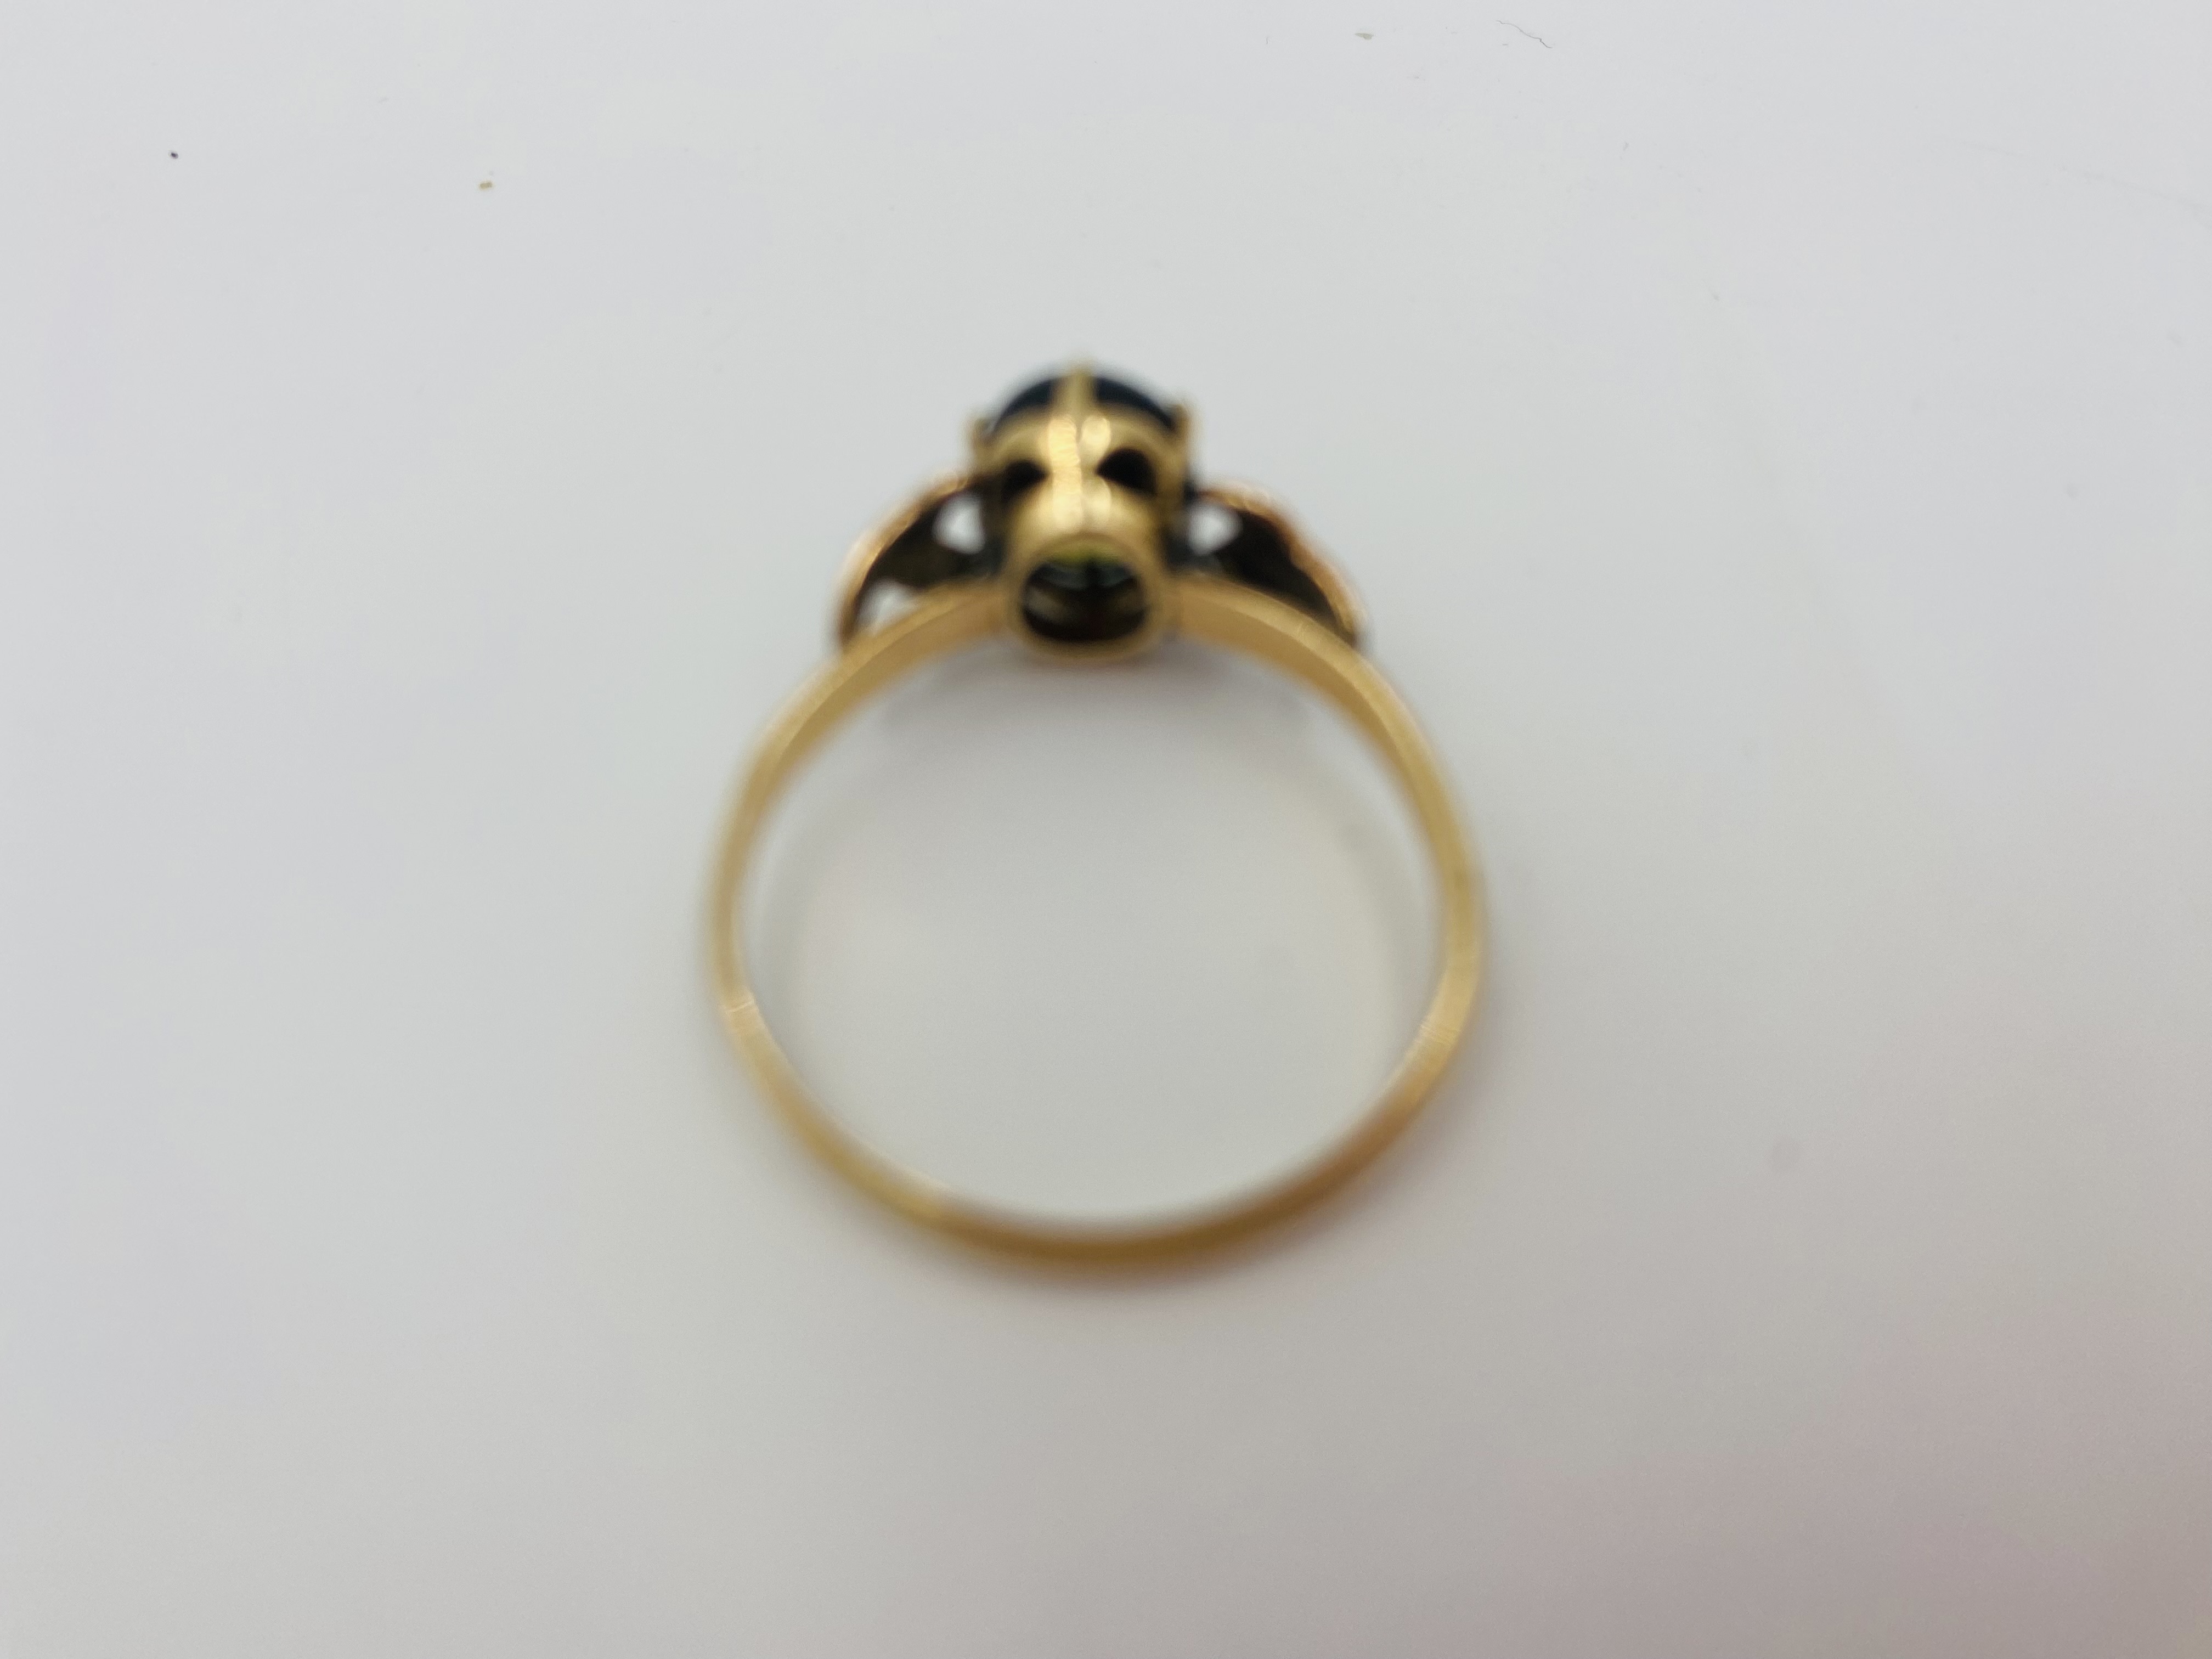 9ct gold ring set with a sapphire cabochon - Image 8 of 9